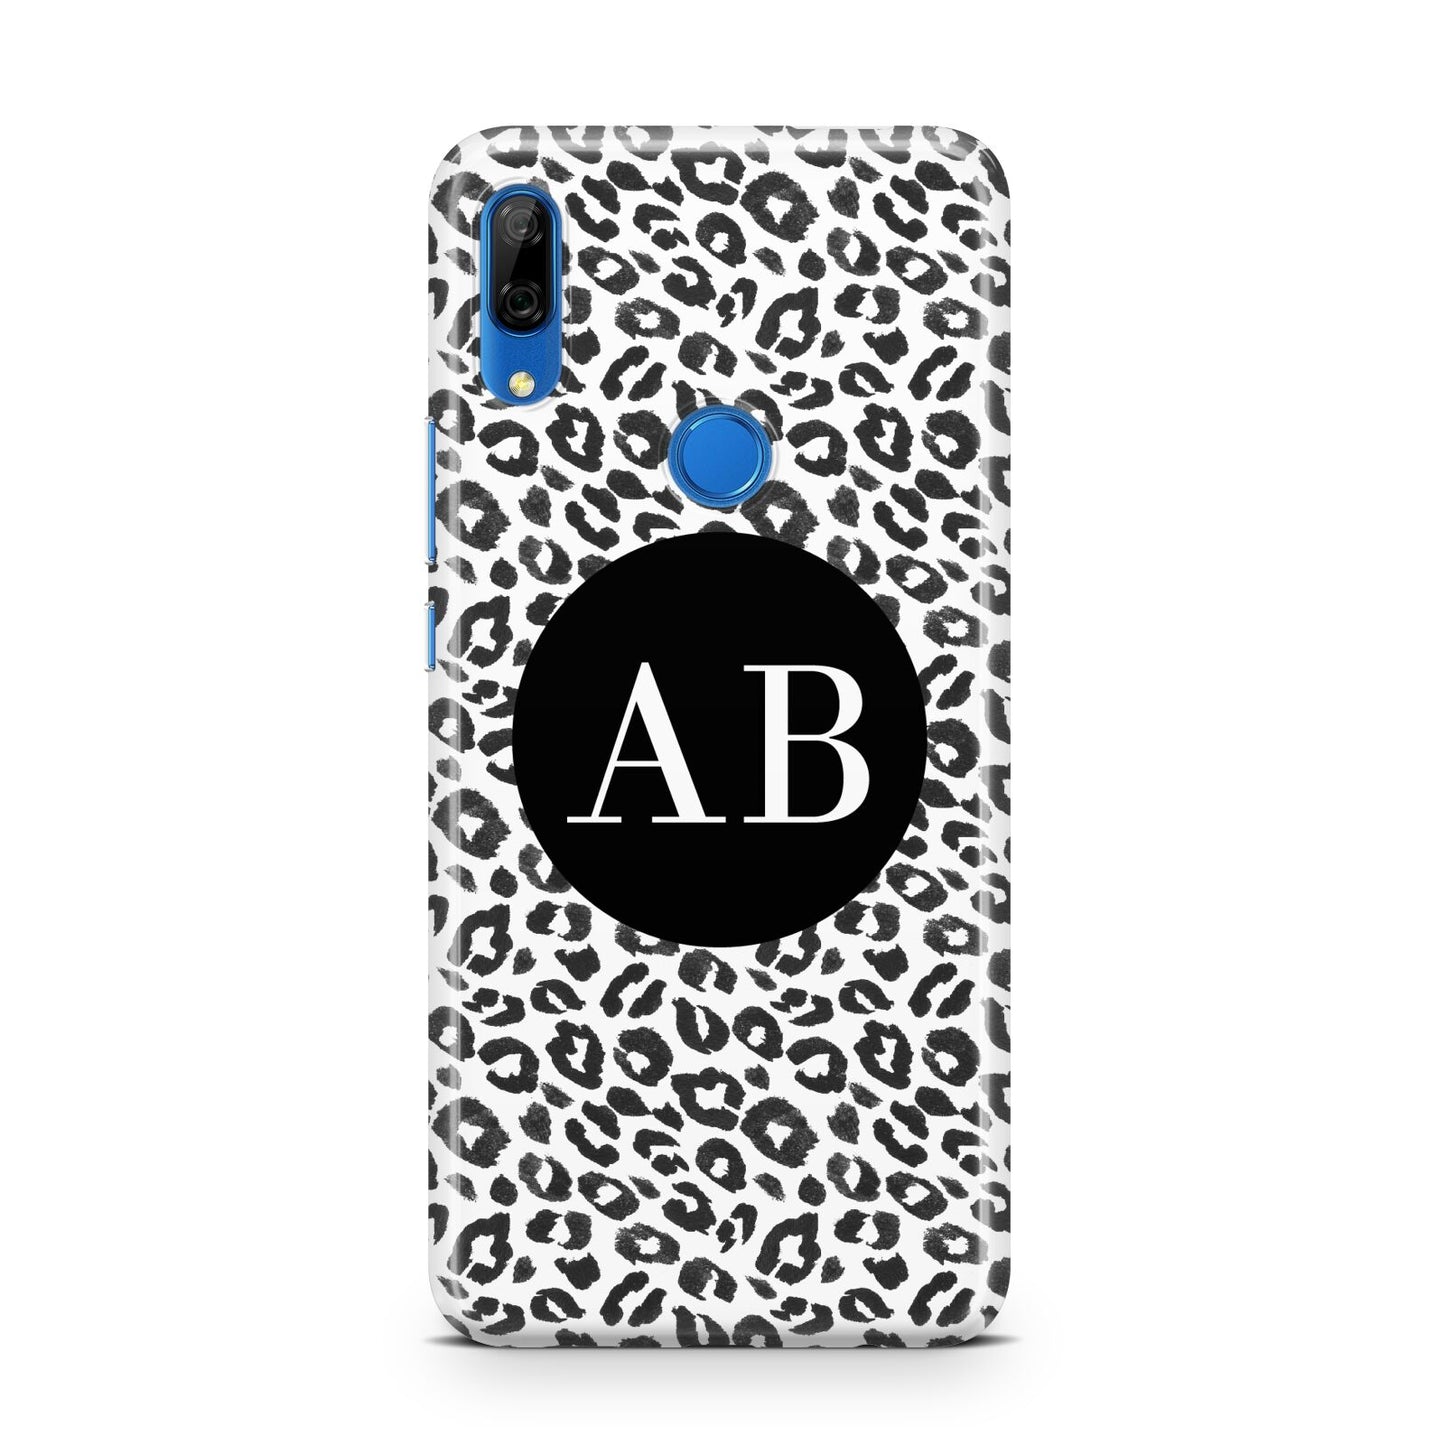 Leopard Print Black and White Huawei P Smart Z